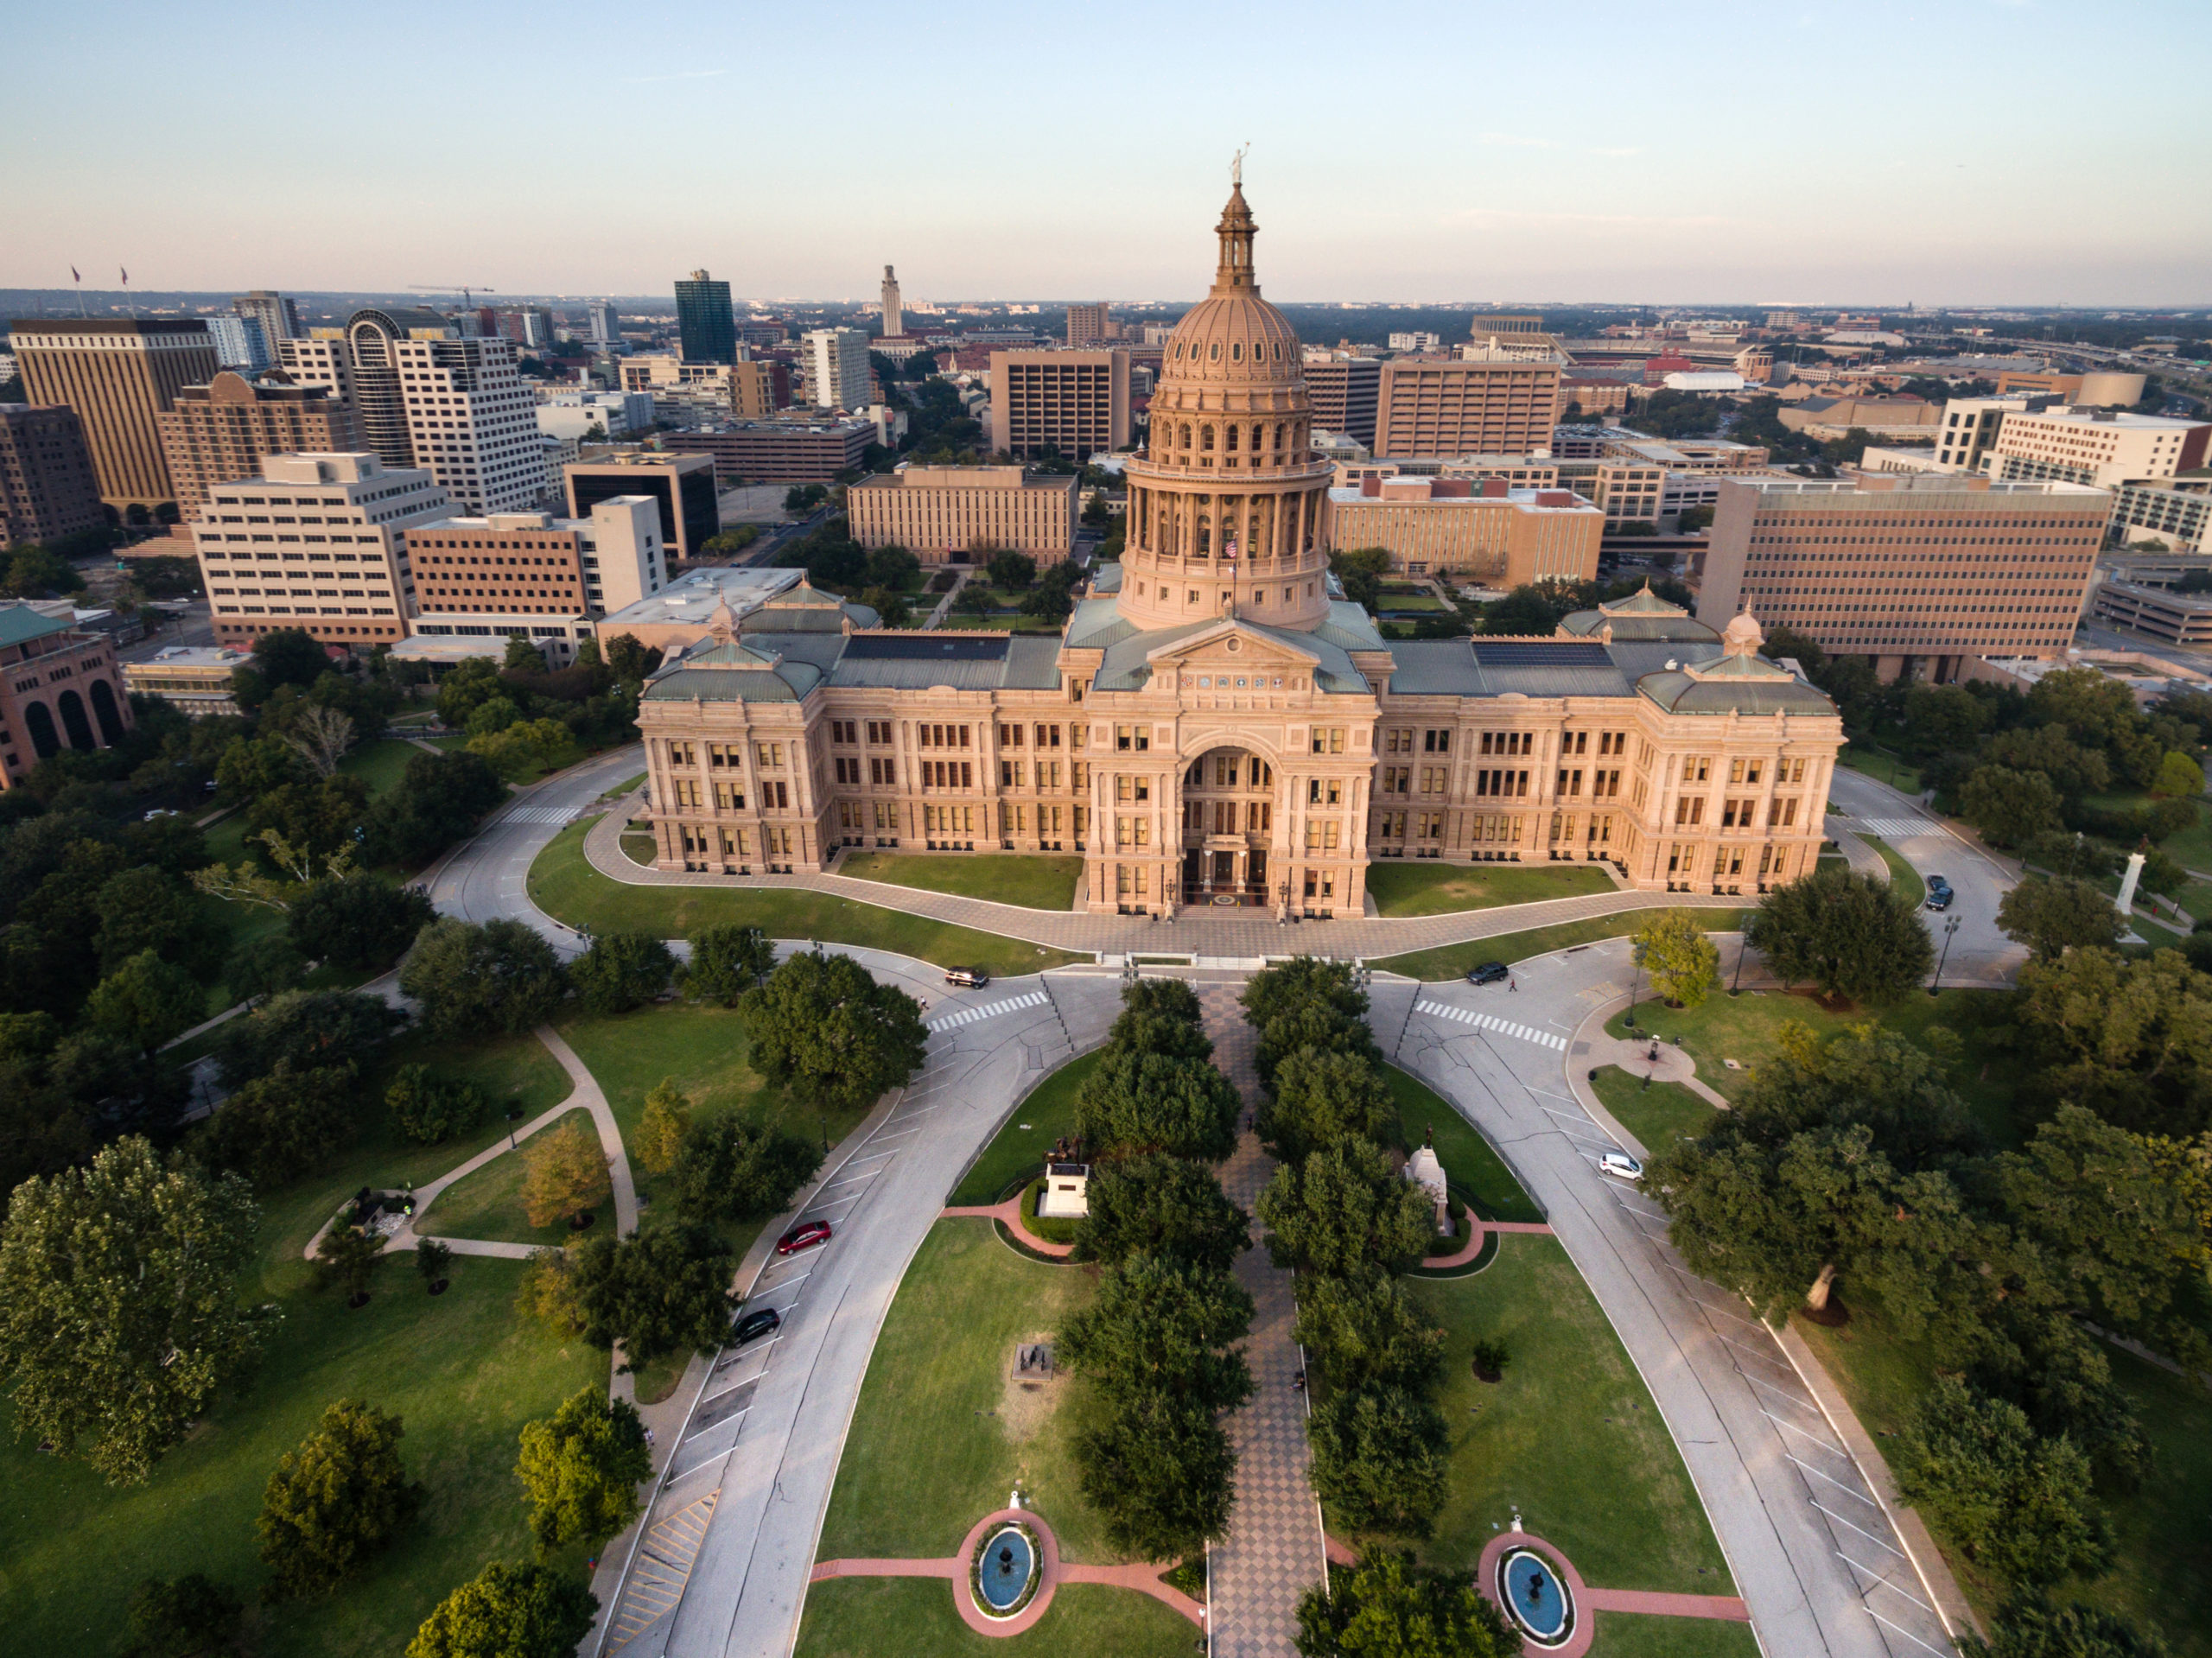 Recent Texas Safety Regulation Serves as a Wake-up Call for Utilities